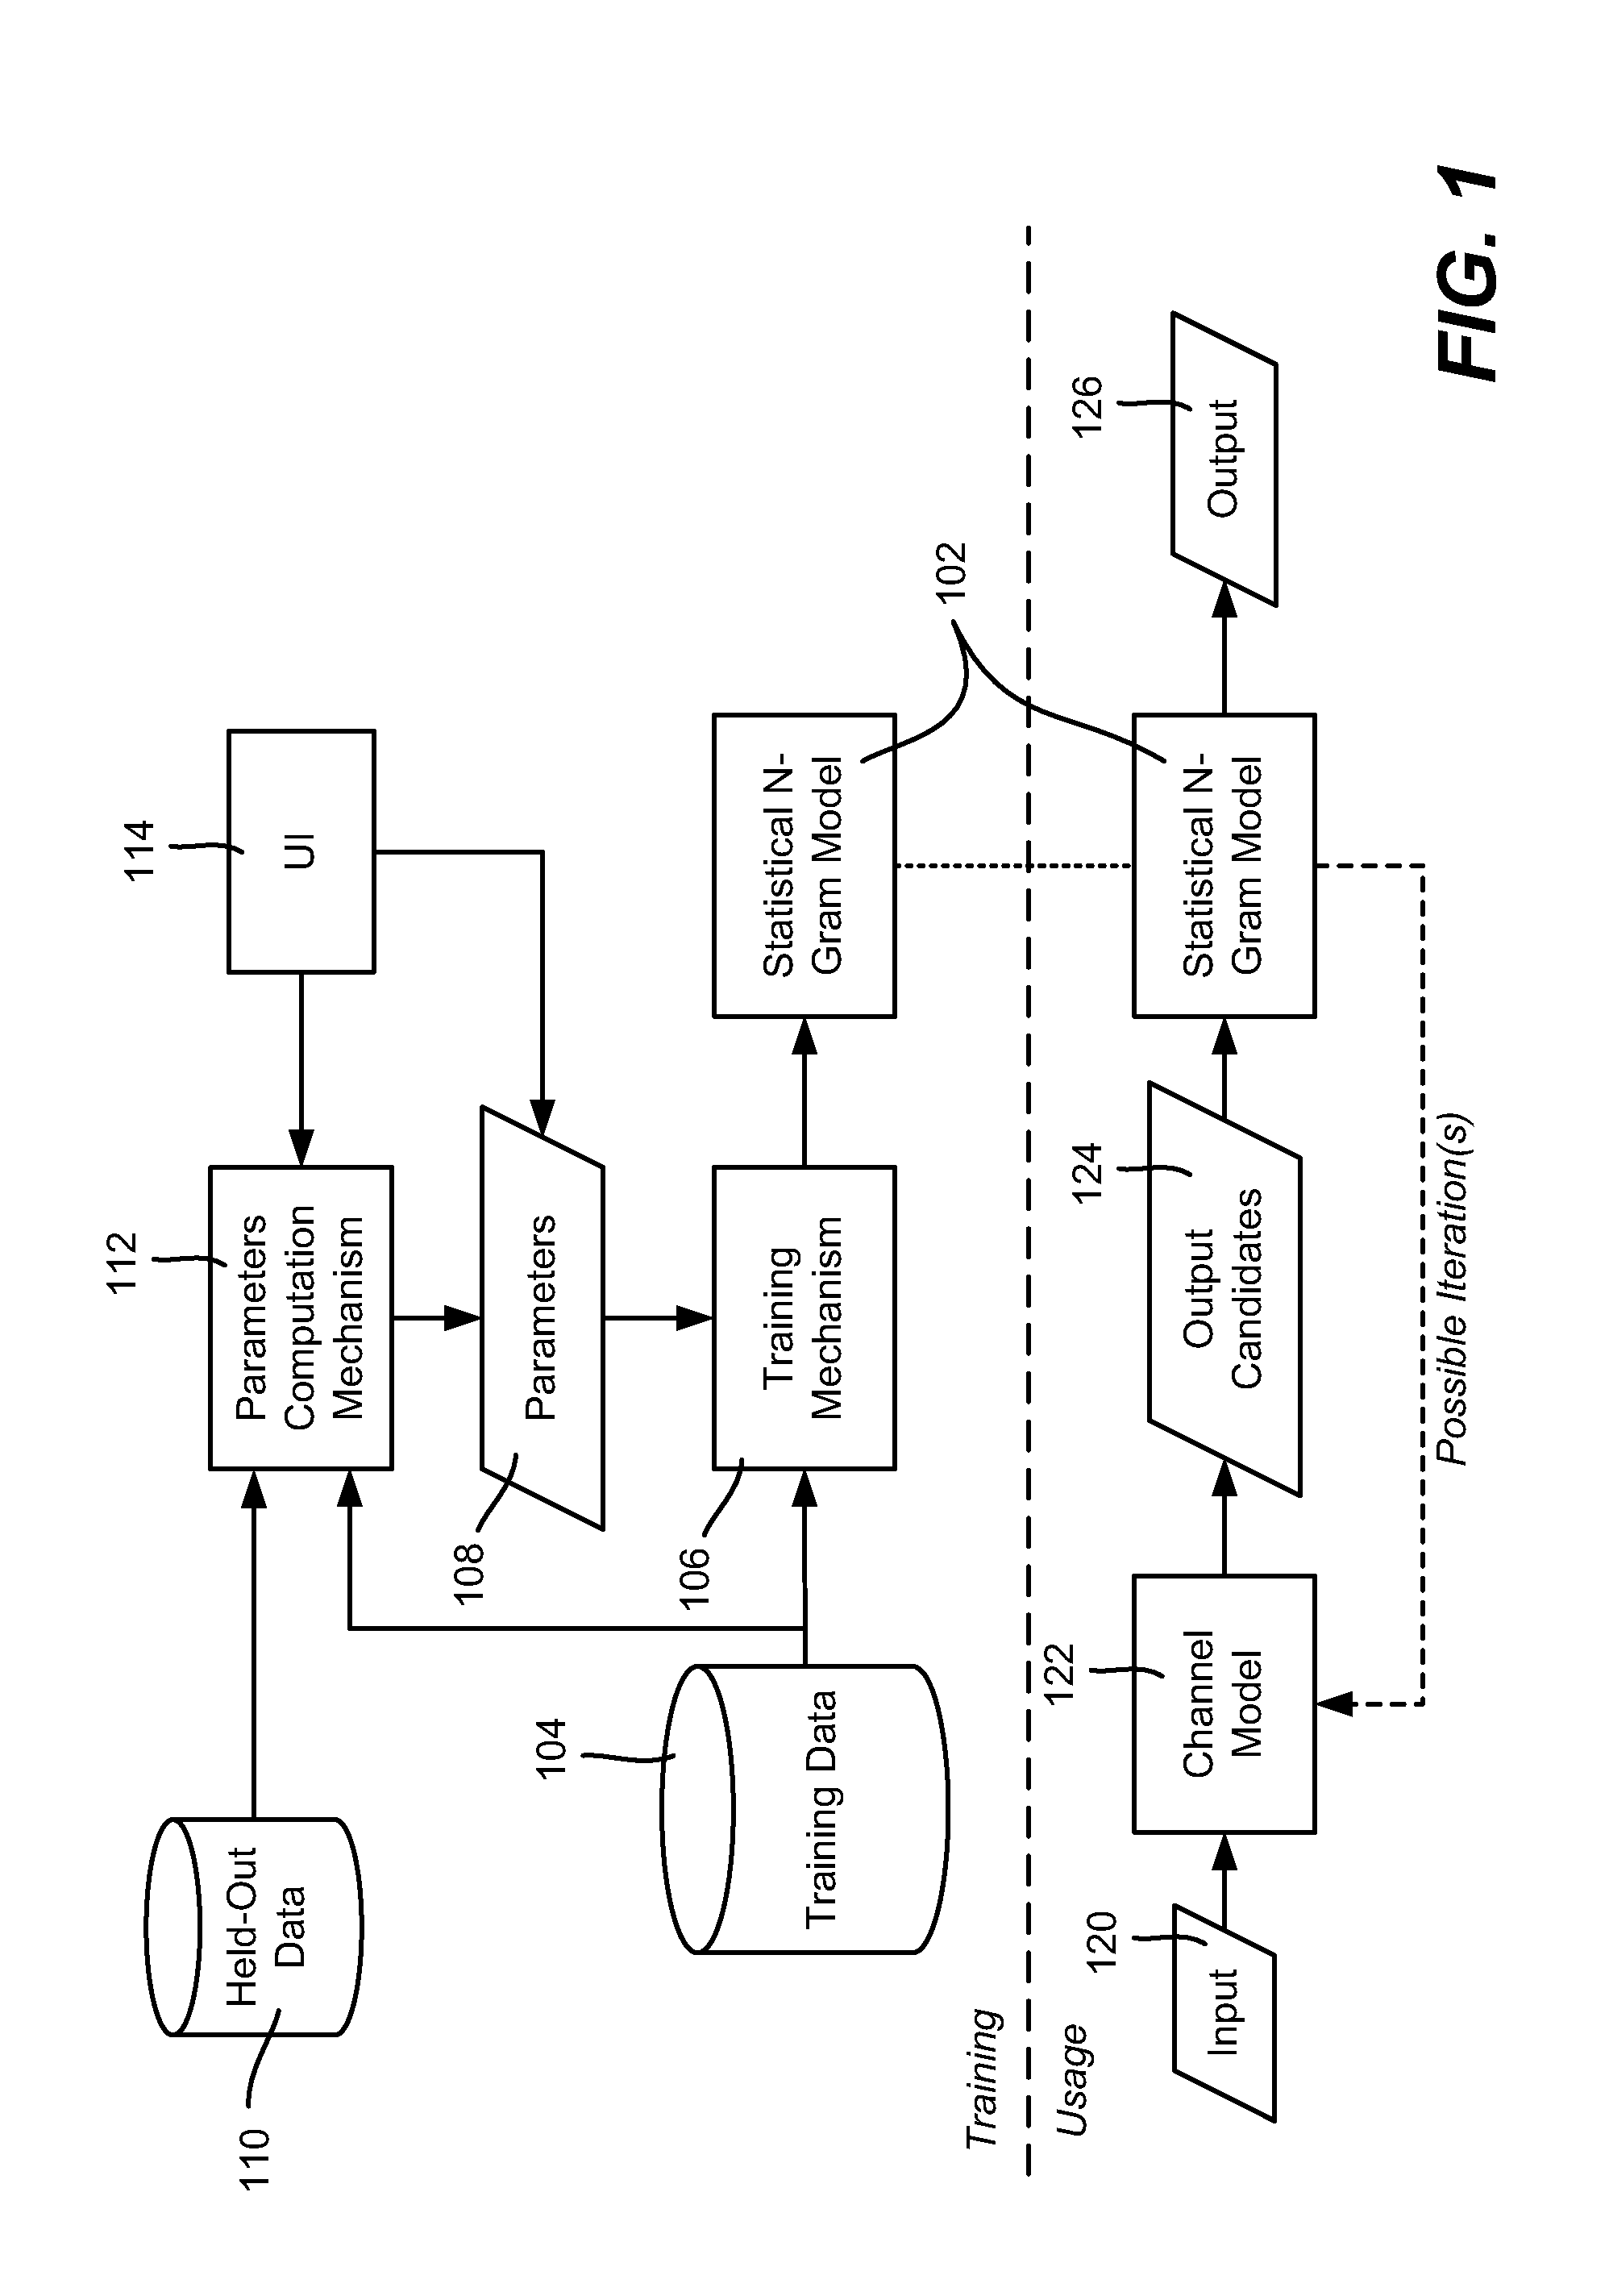 N-Gram Model Smoothing with Independently Controllable Parameters